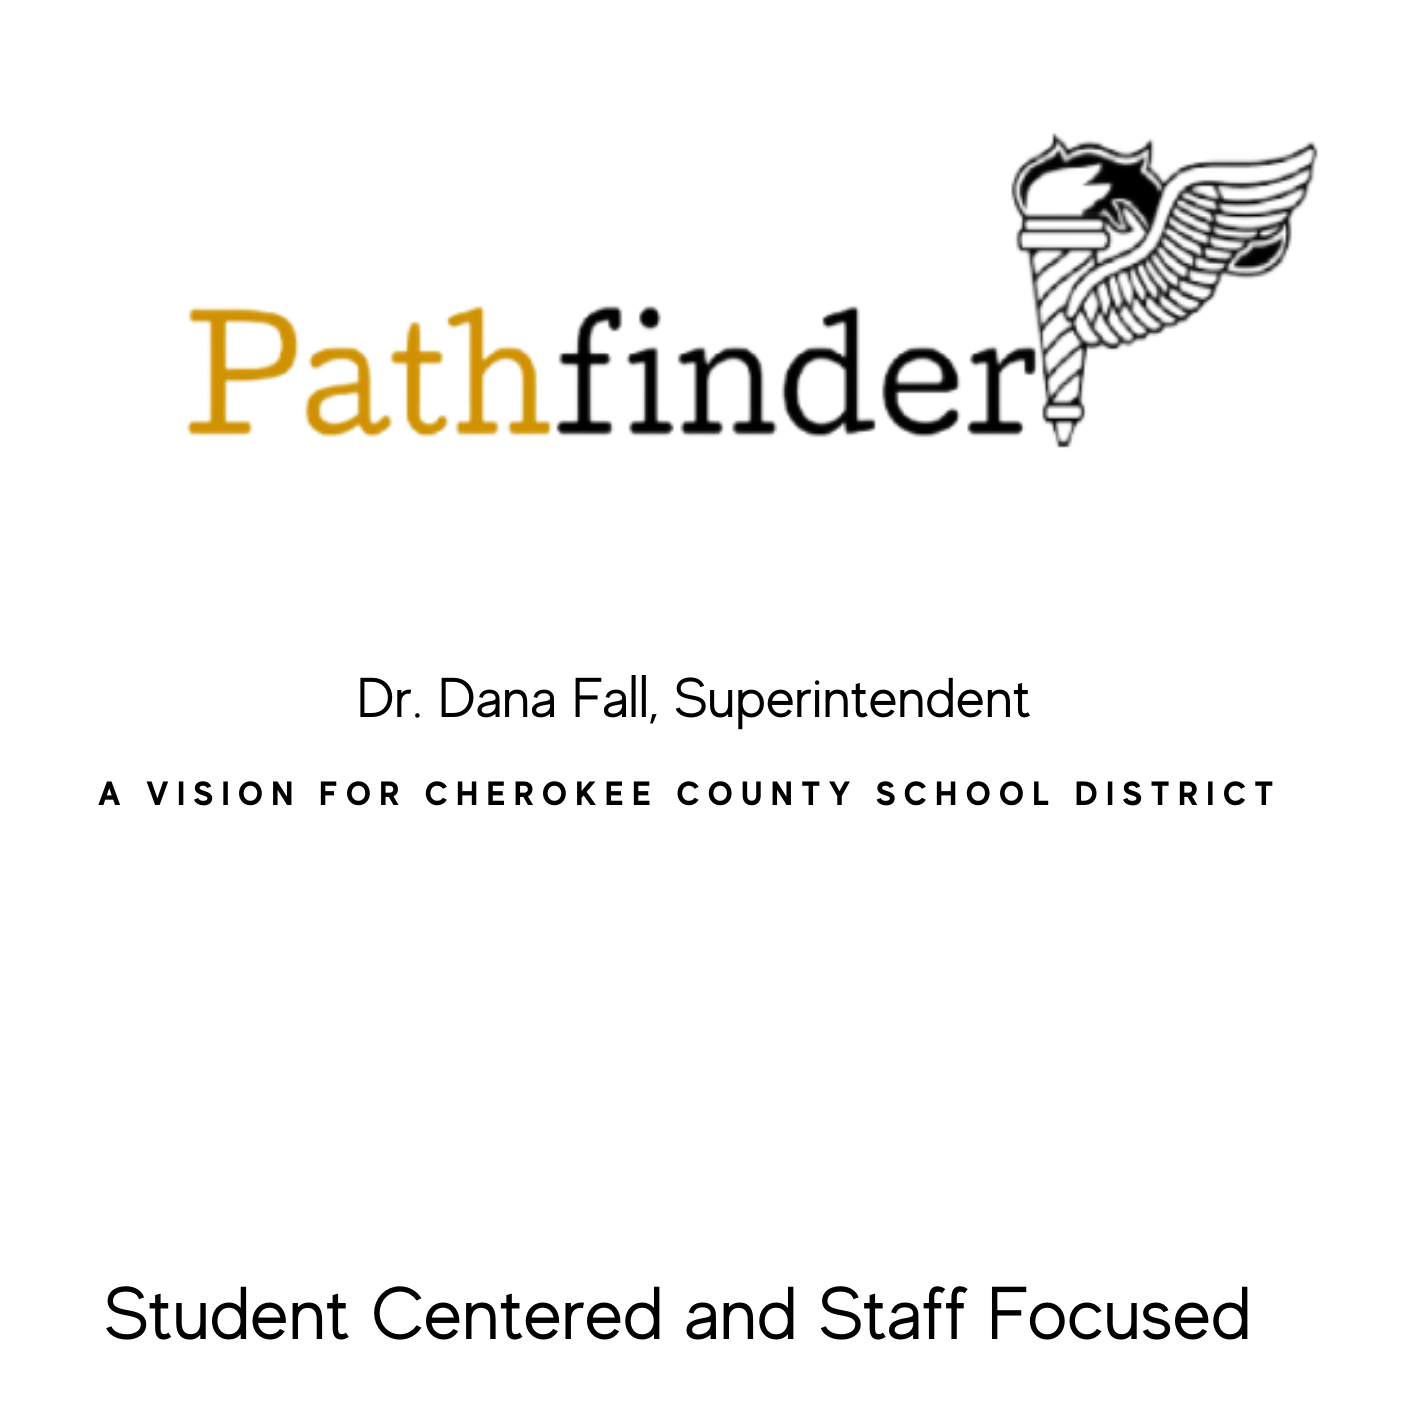 Pathfinder - A Vision for Cherokee County School District